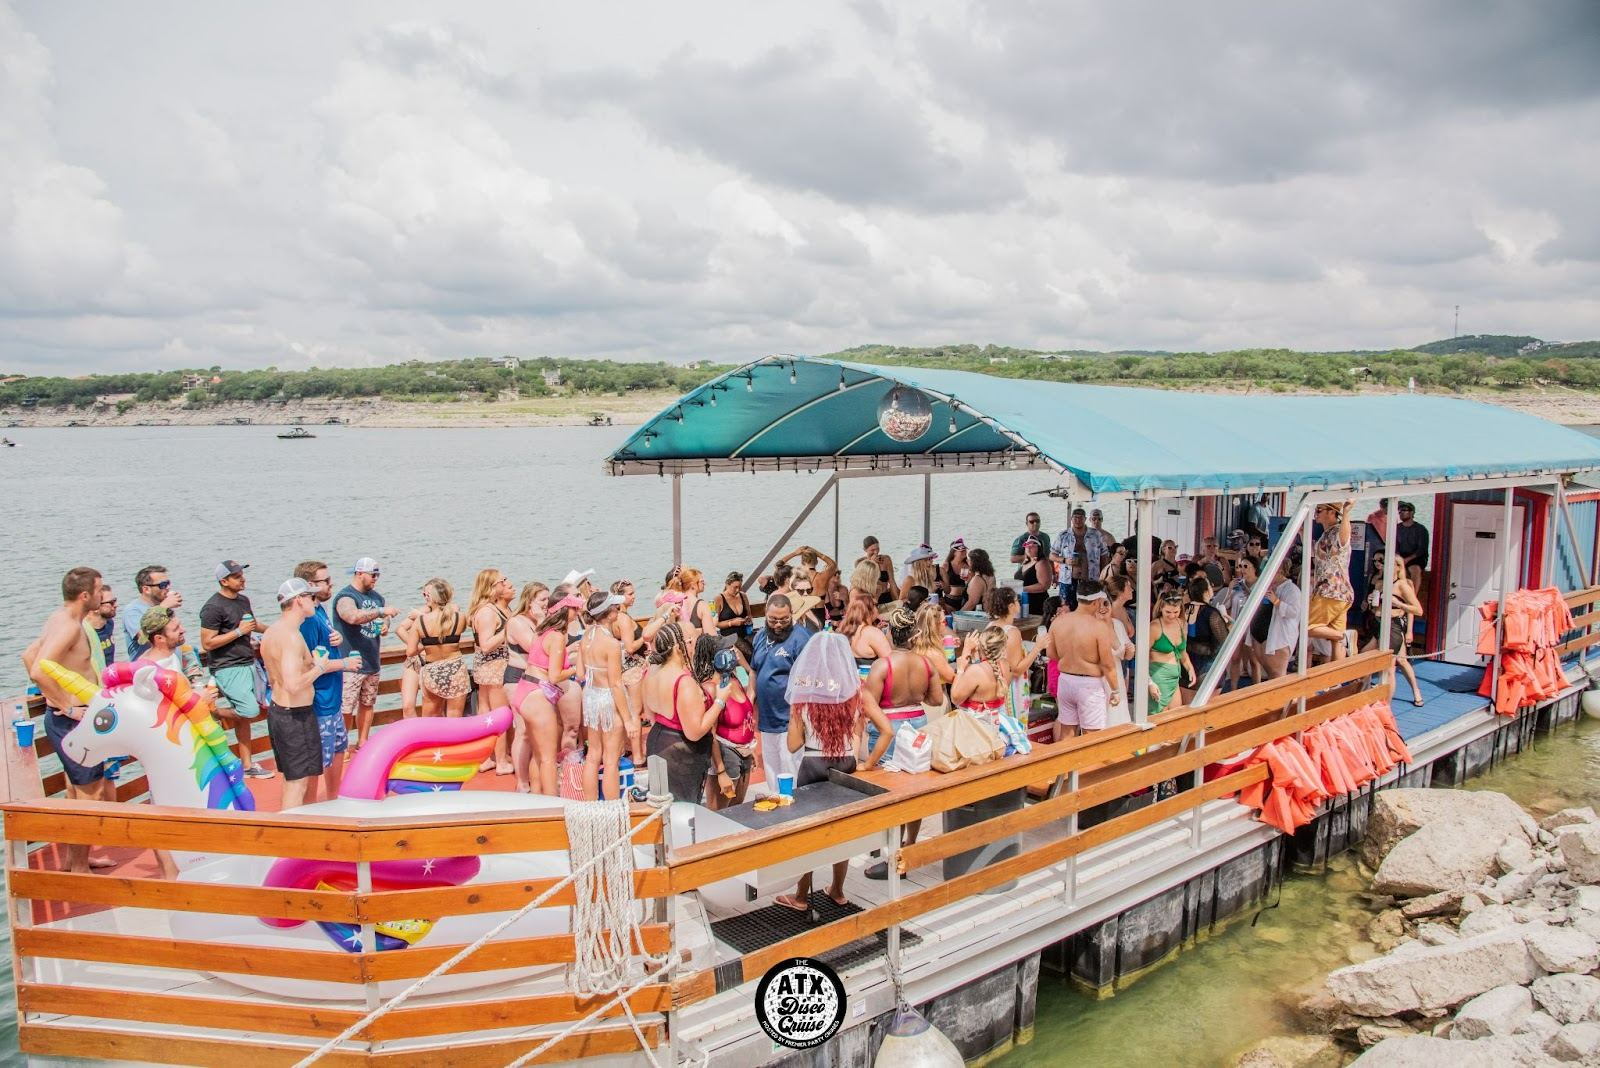 Experience the thrill of ATX Disco Cruise fun with Premier Party Cruises"